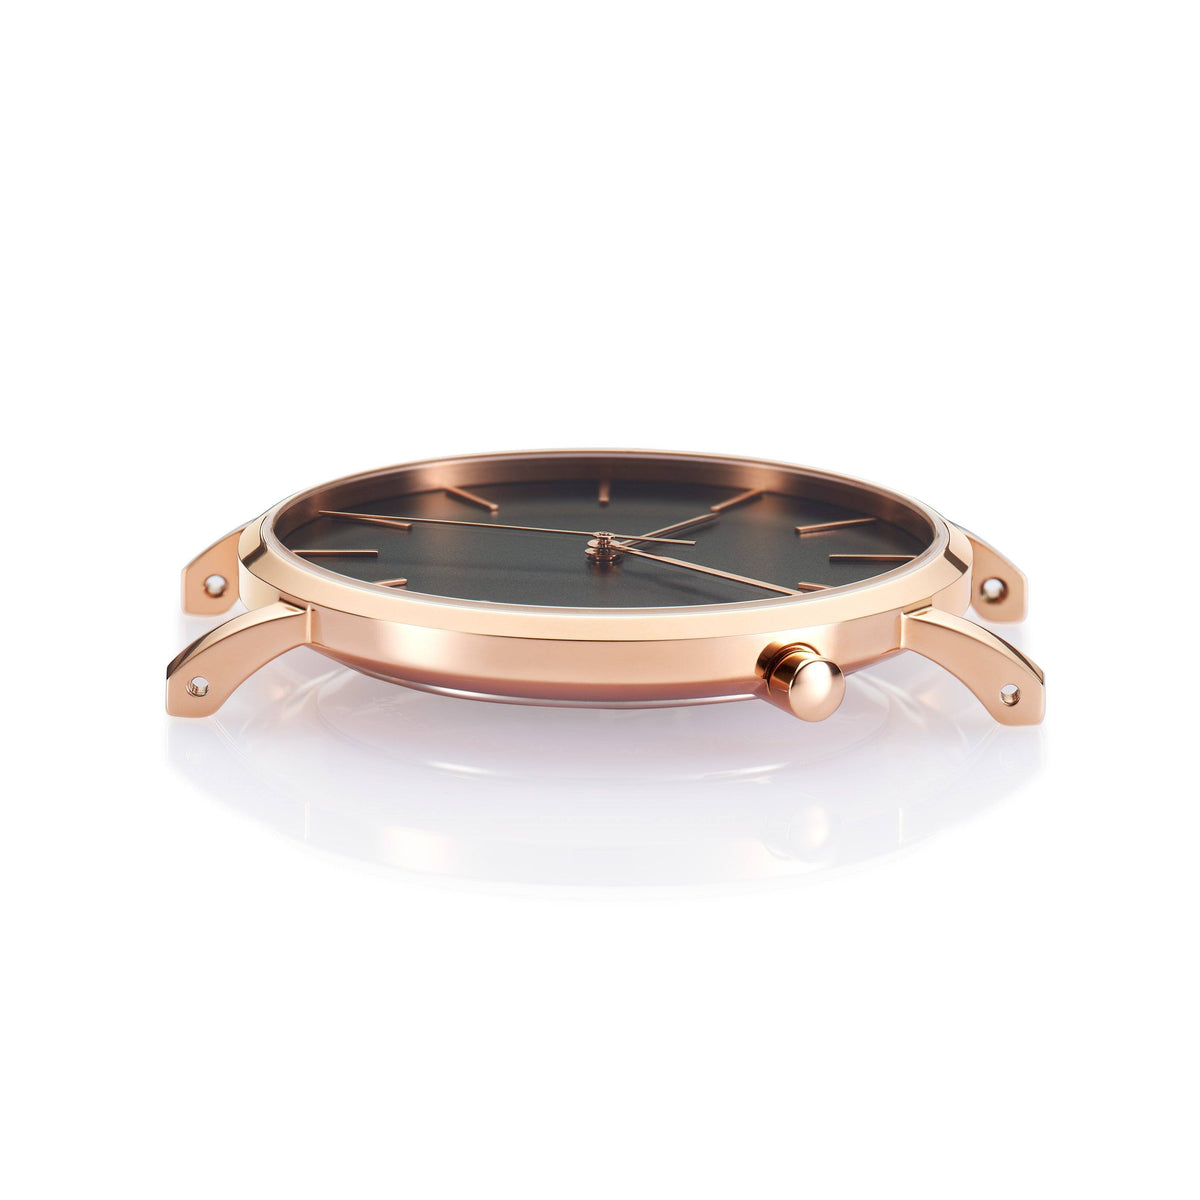 The Black and Rose Gold Watch - Leather